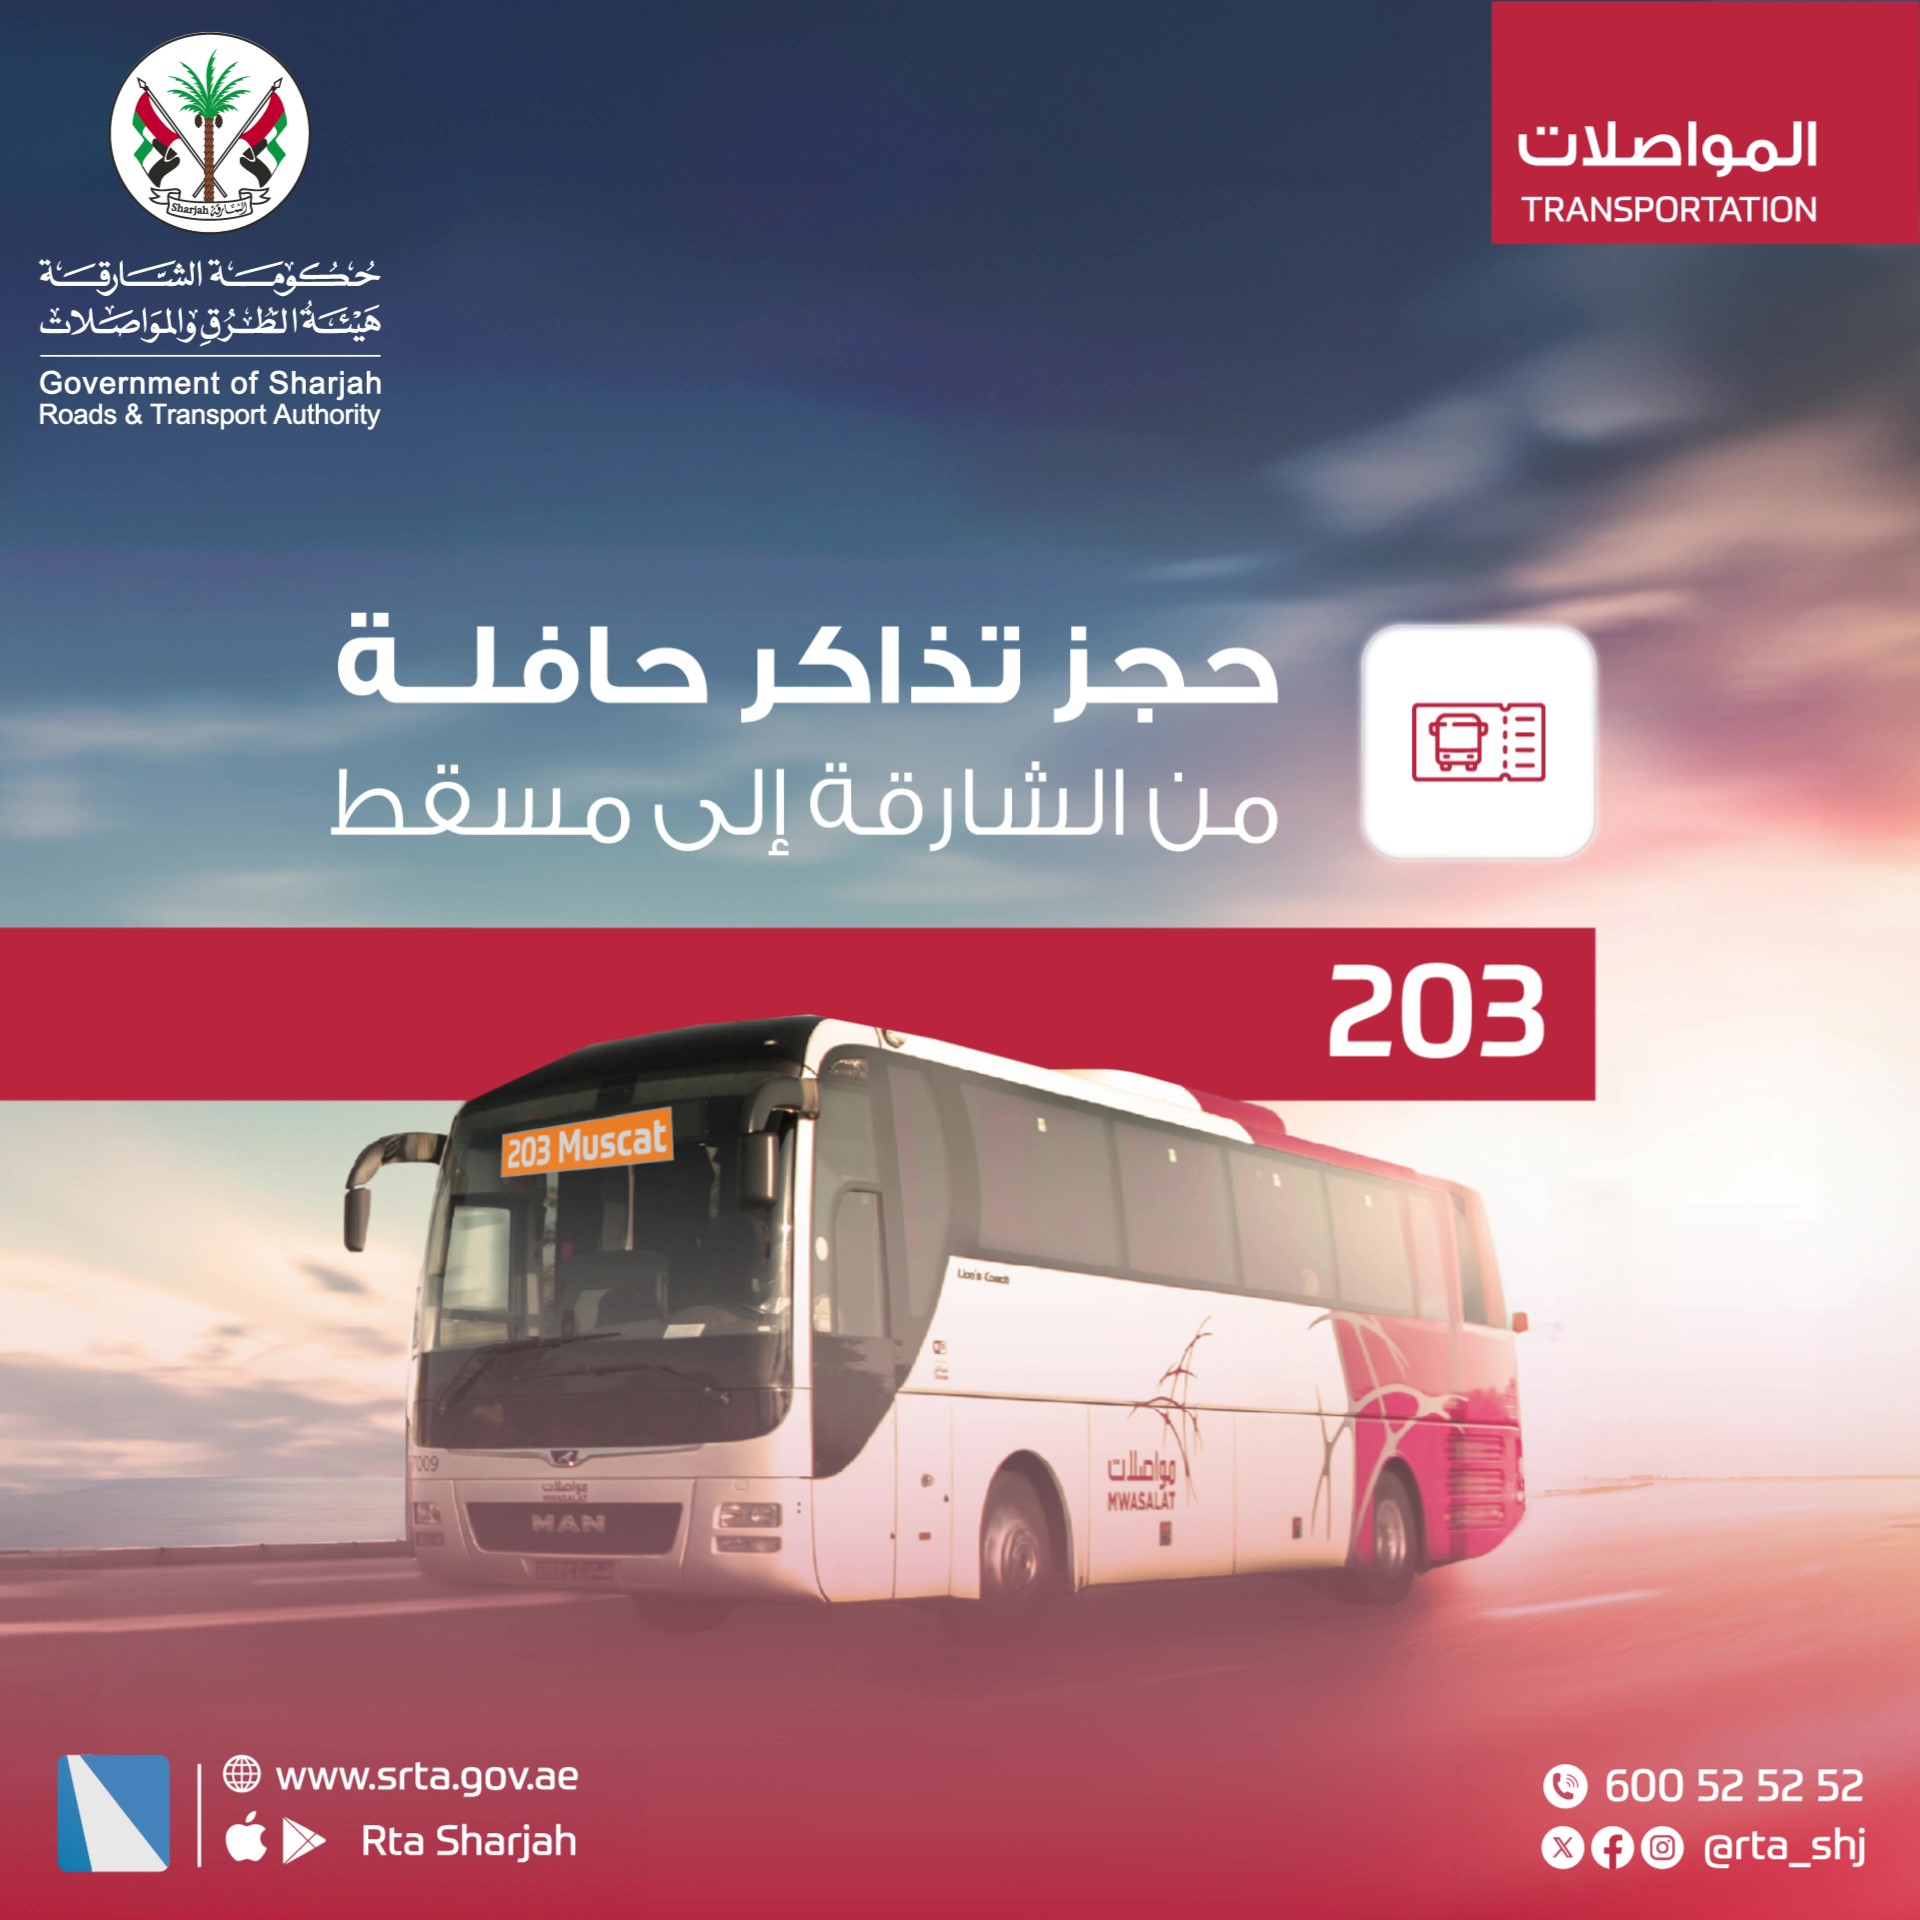 You can book tickets for the Sharjah - Muscat flight on international line 203